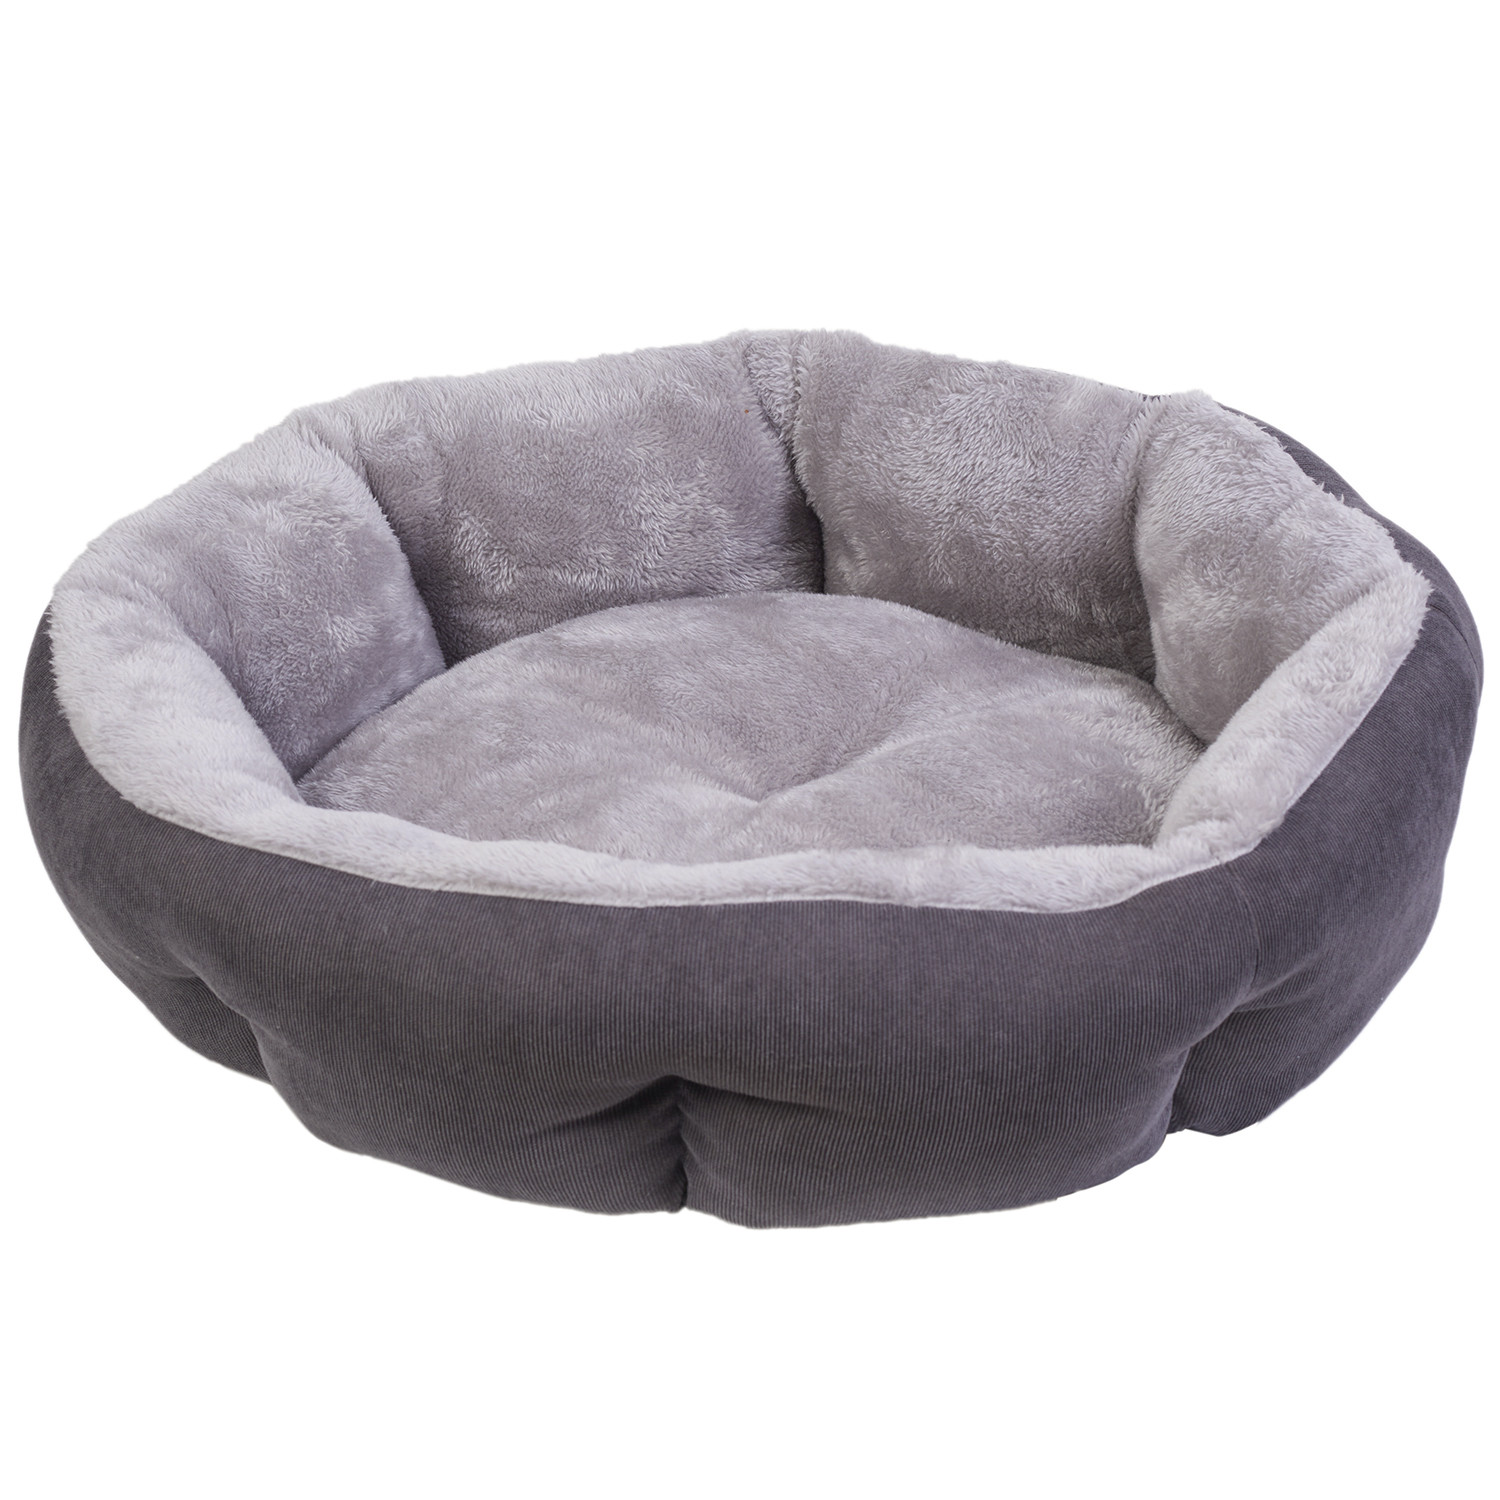 Clever Paws Cord Round Large Pet Bed Image 1